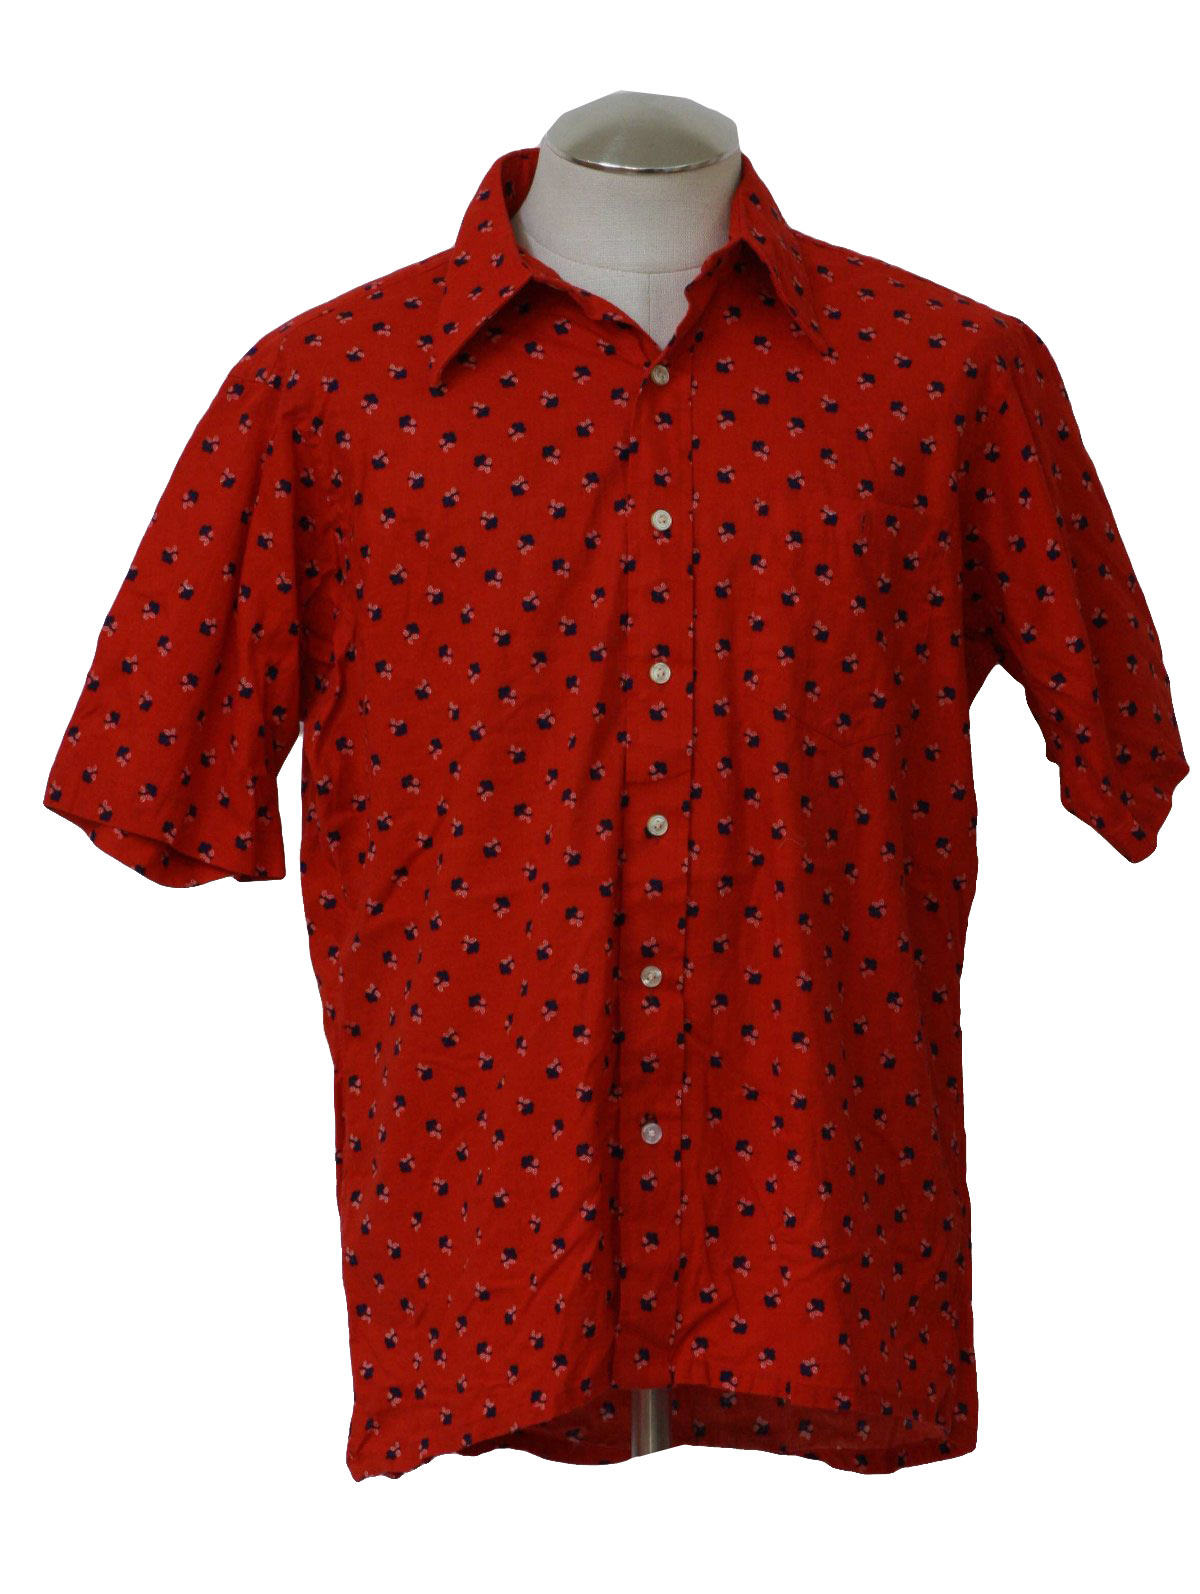 60's Vintage Shirt: 60s -Reyns by Hathaway- Mens red, white and blue ...